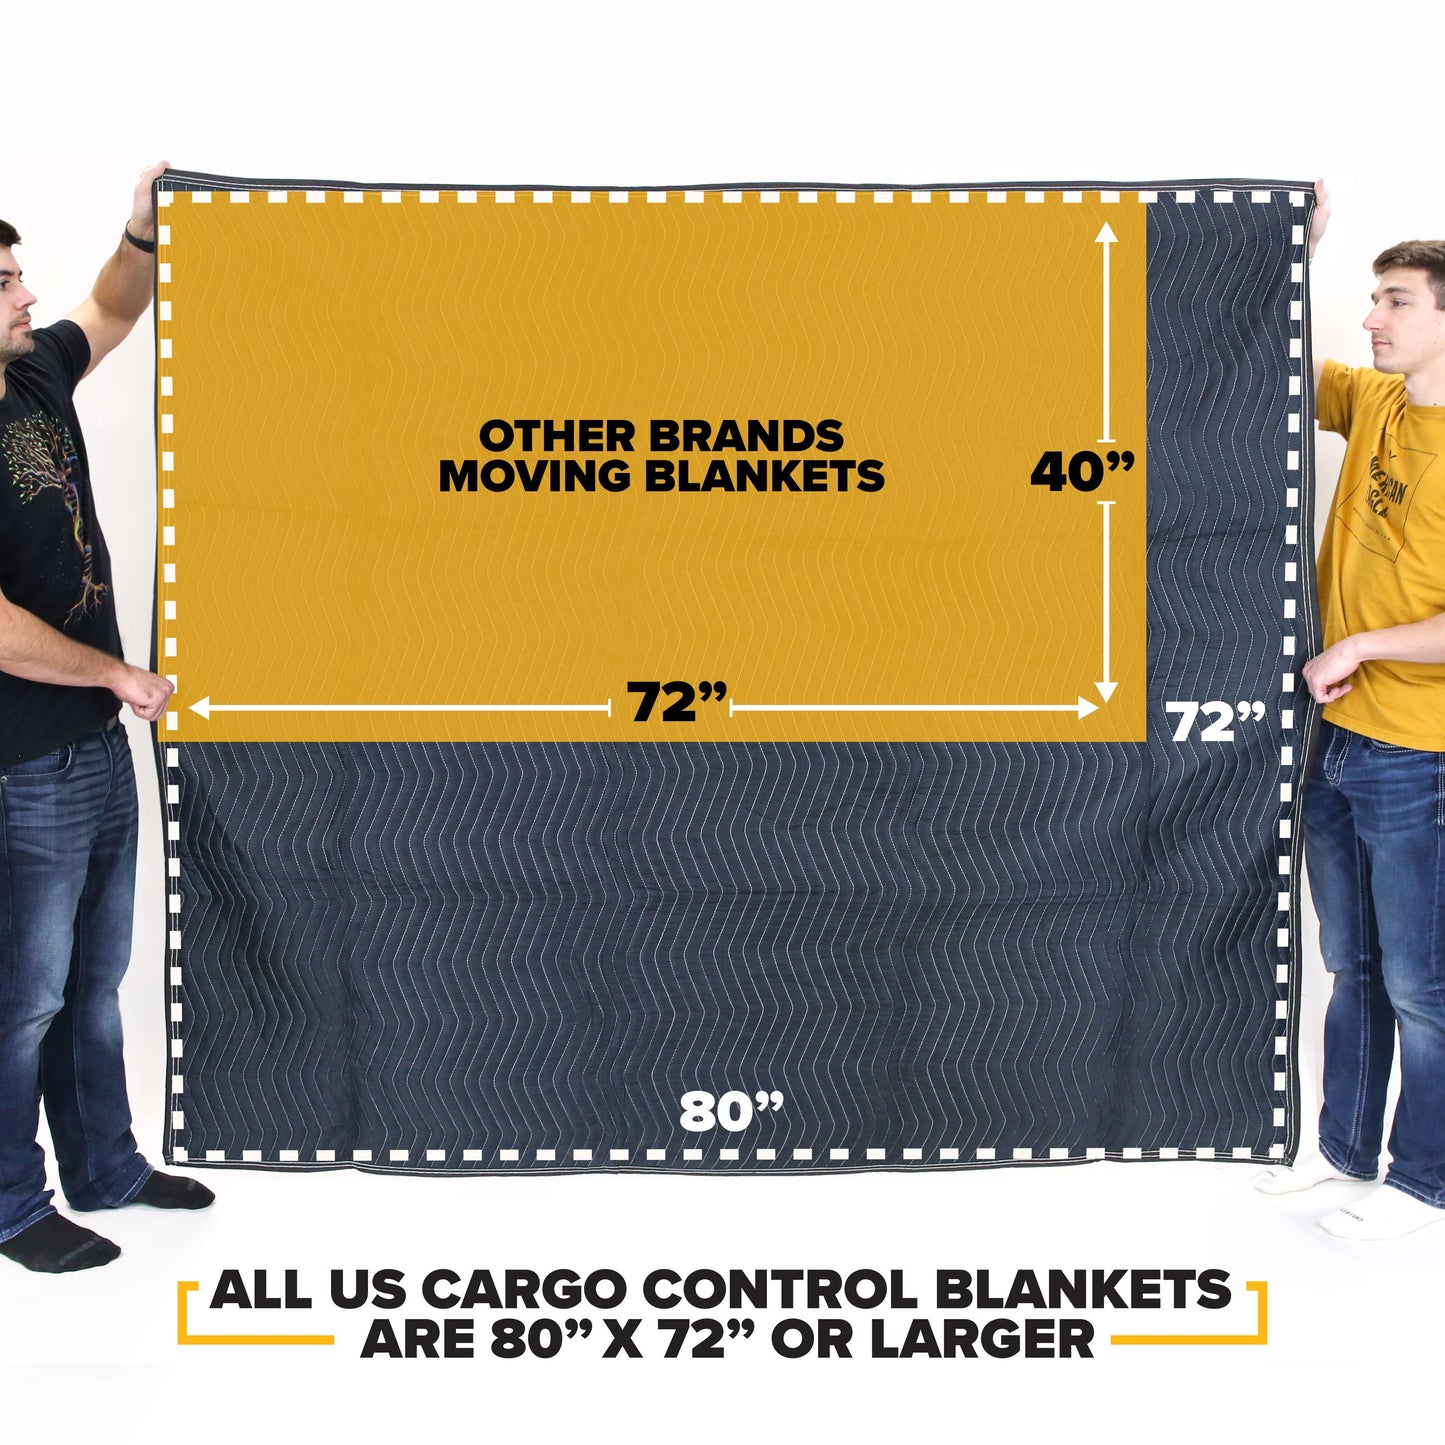 Moving Blanket- Performance Mover image 4 of 11